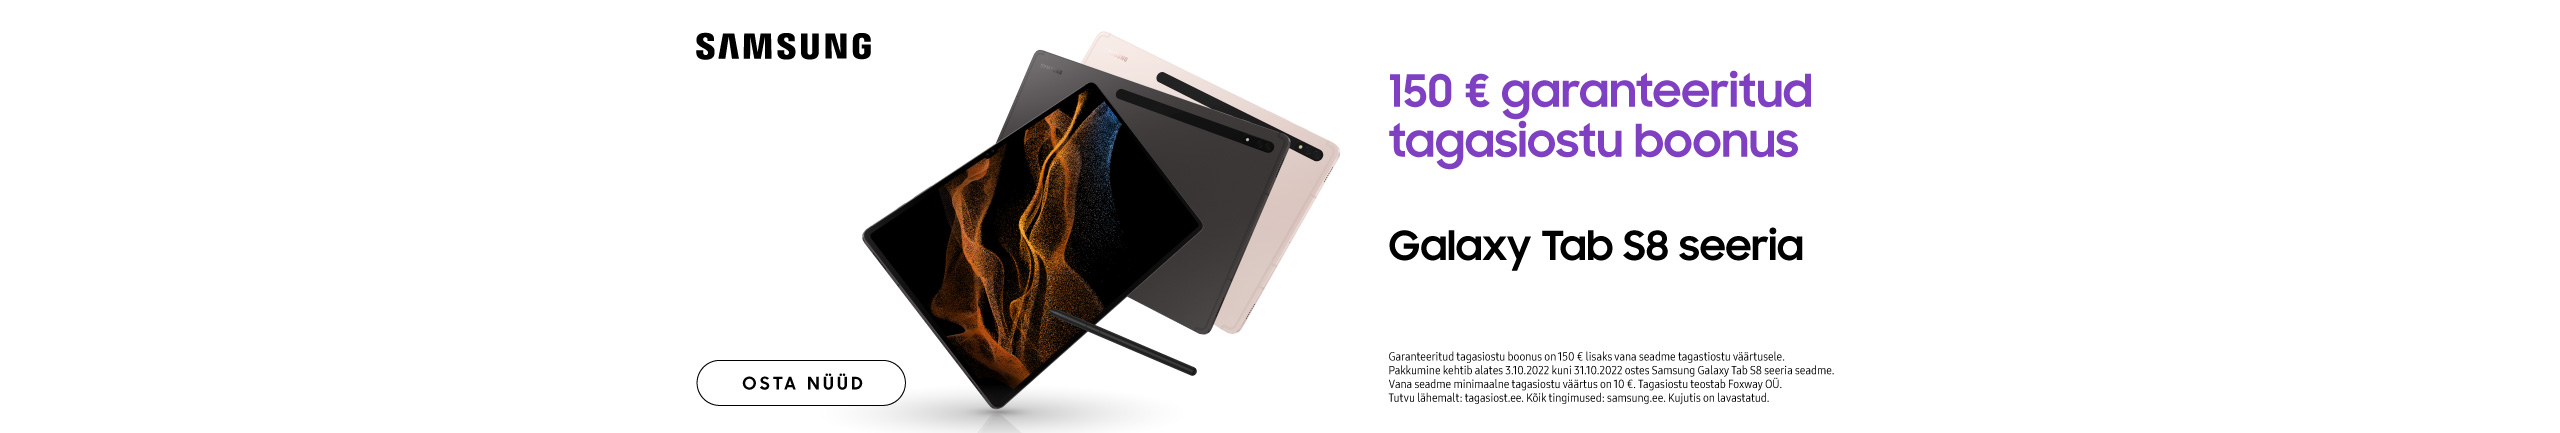 Samsung Galaxy Tab S8 trade-in promotion